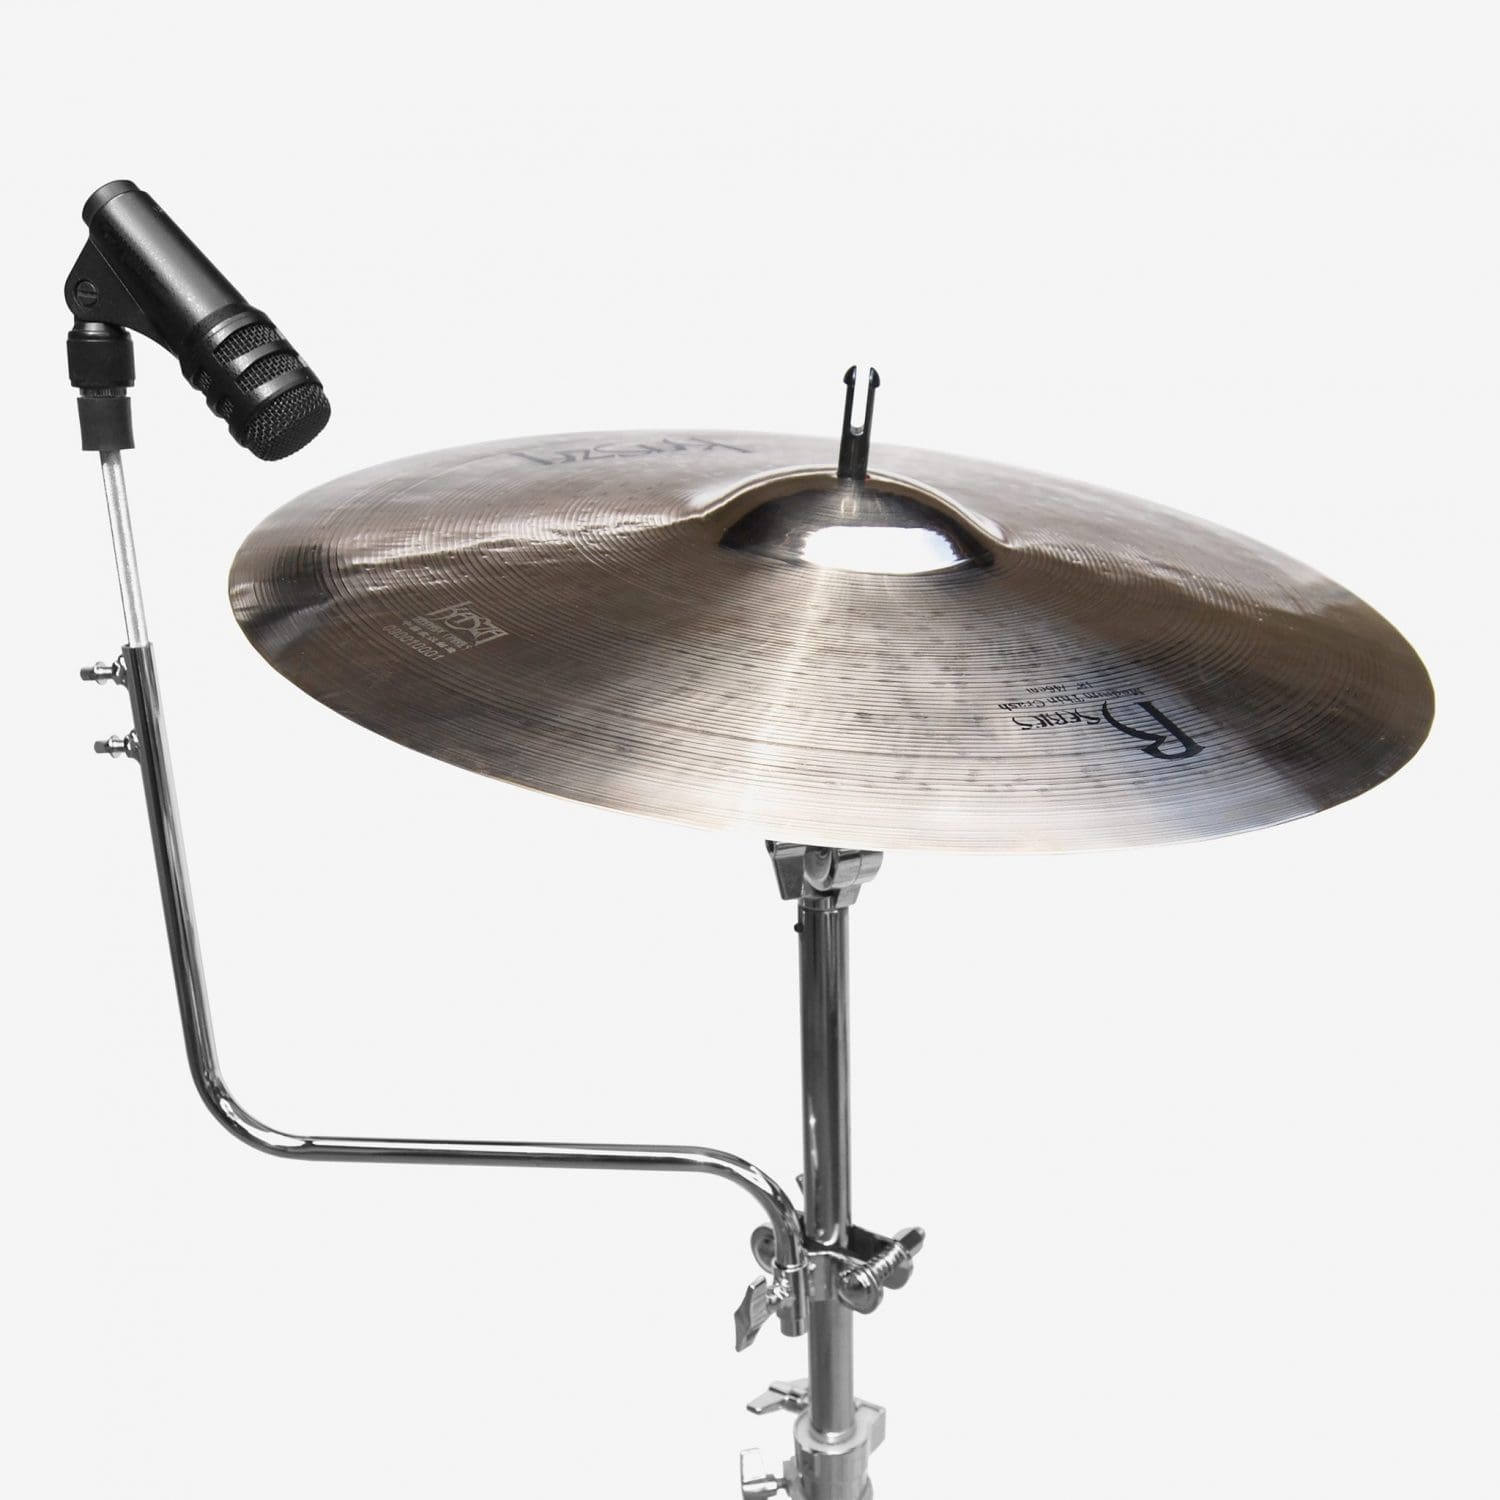 Cymbal/Snare Microphone Mount